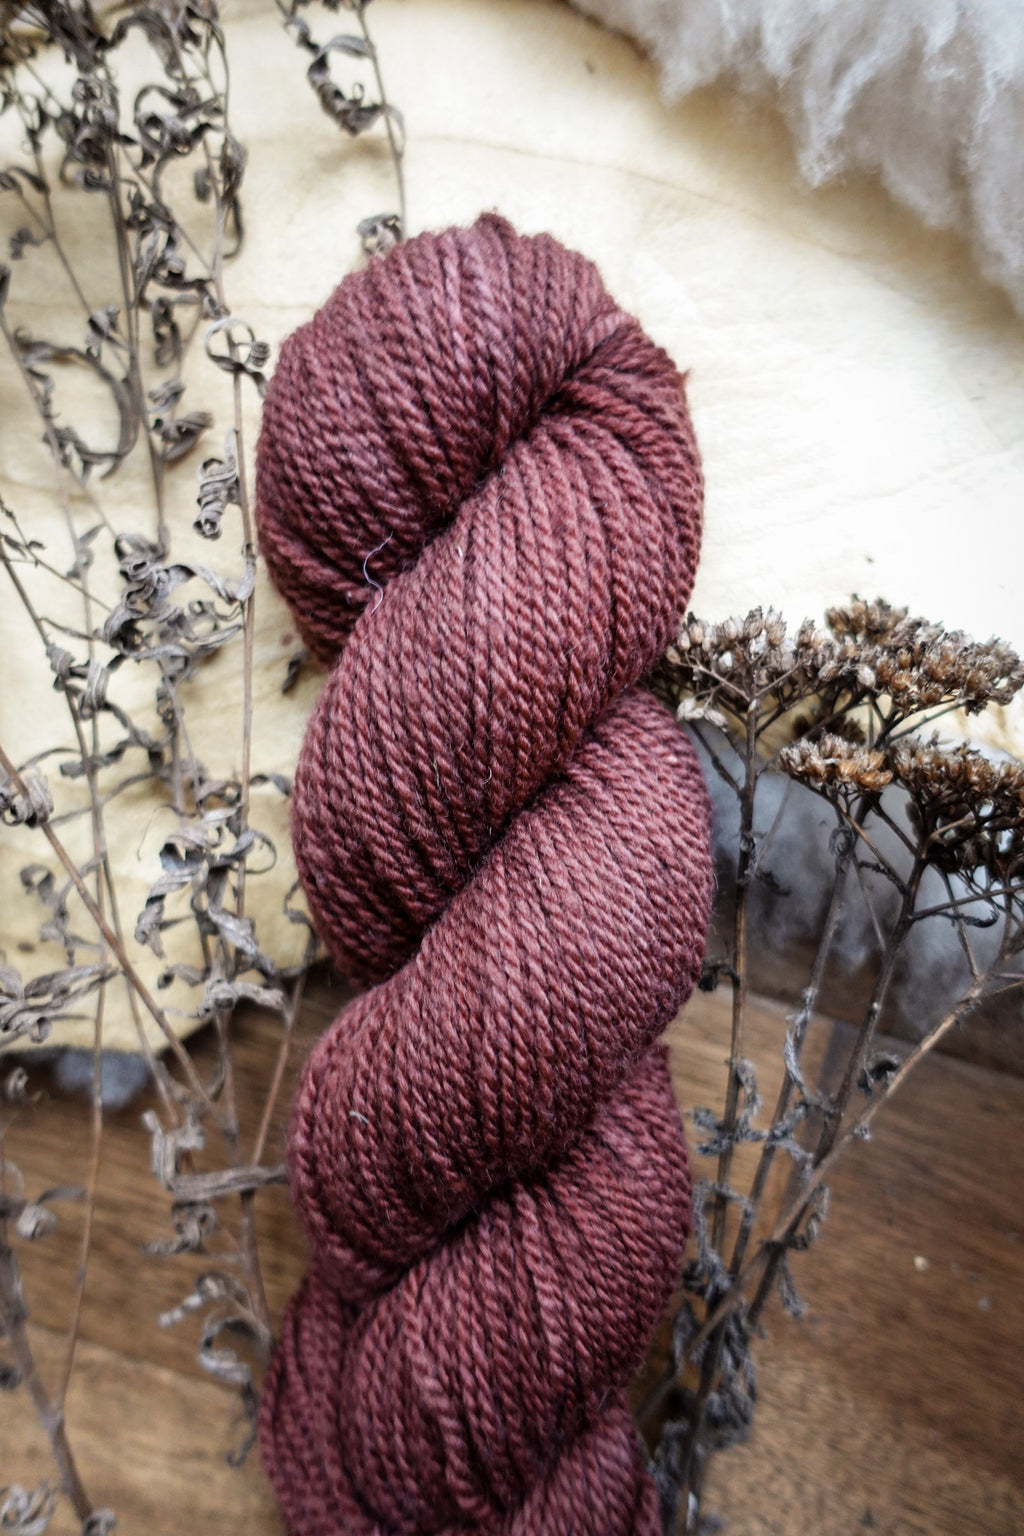 A DK weight skein of natural fiber yarn has been hand dyed a reddish pink. It lays on a tabletop next to dried flowers.